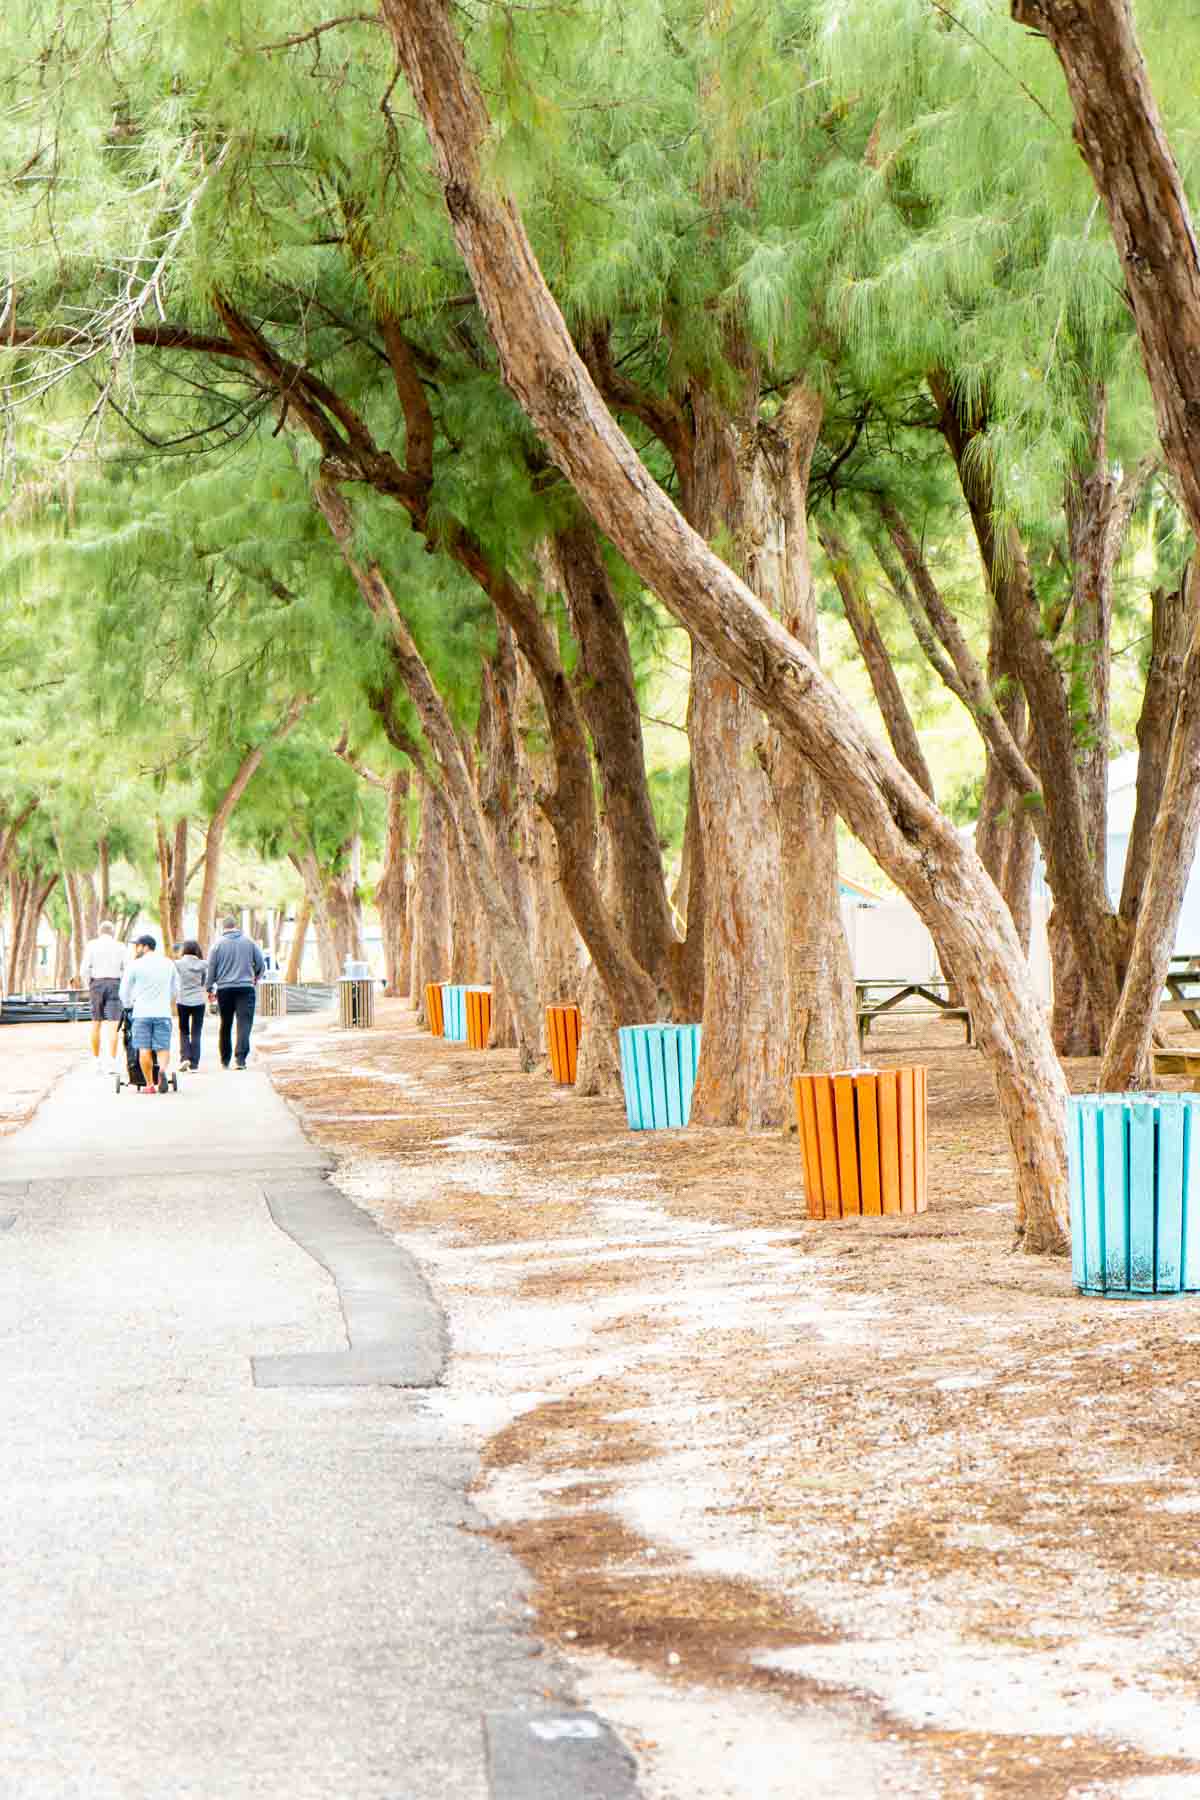 Walking trail with colored trash cans